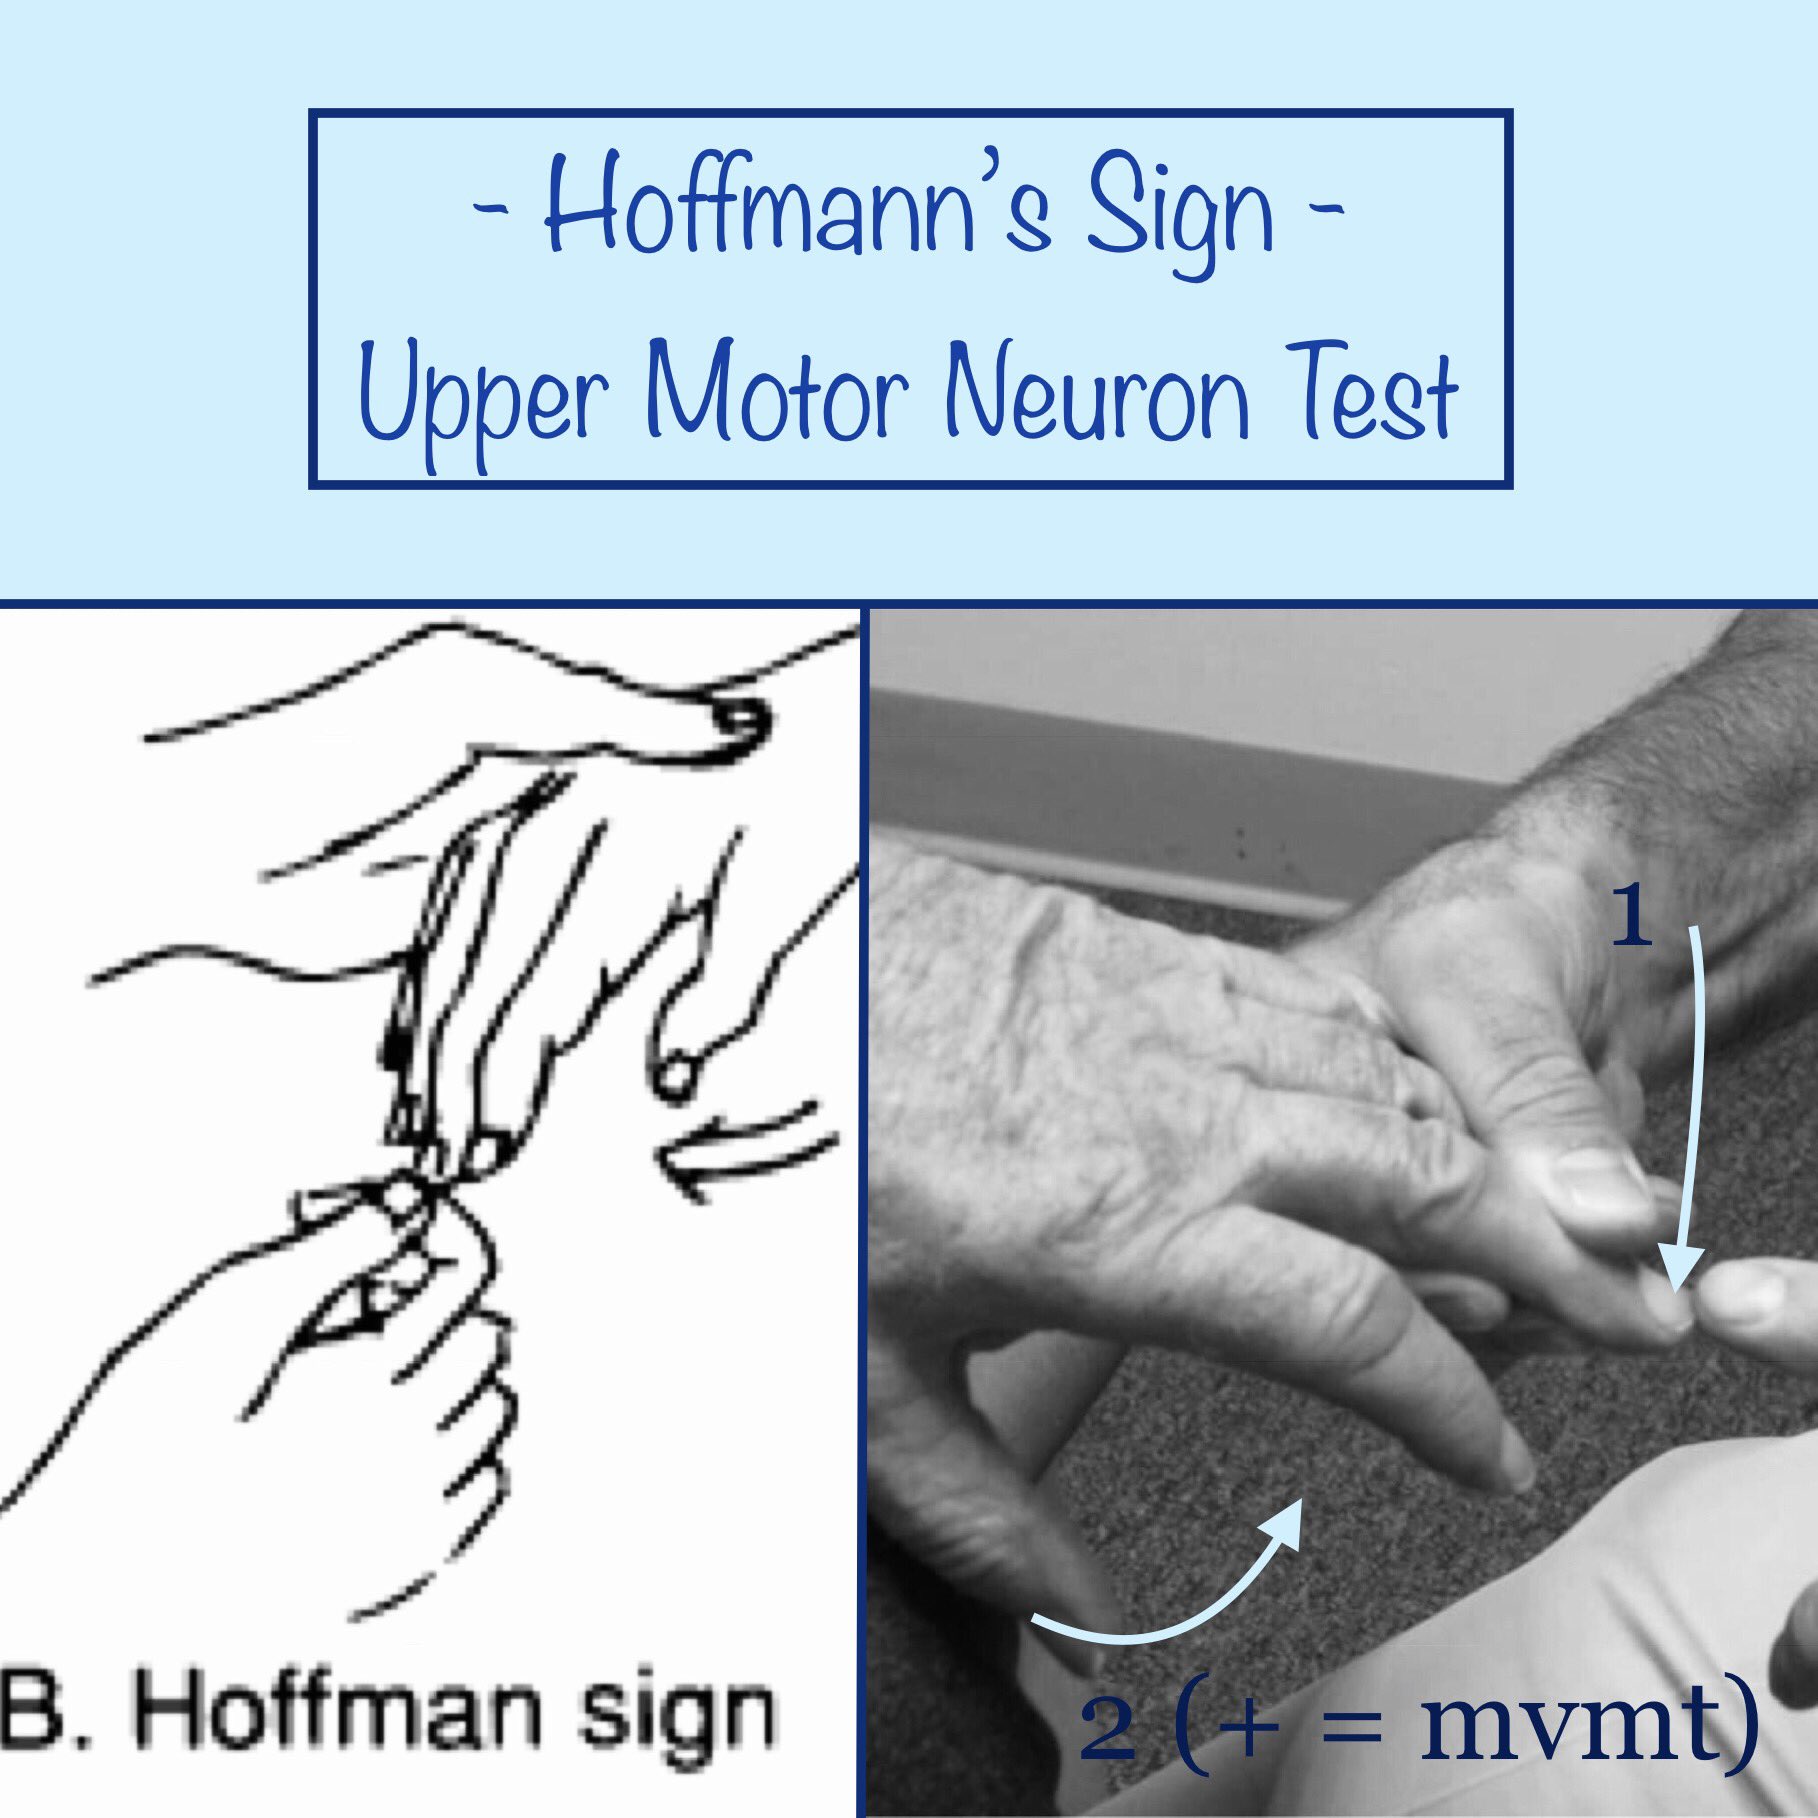 Lil Bone Peep Hoffmann S Sign Upper Motor Neuron Test Perform By Flicking Or Tapping The Nail While Relaxed Sign If The Thumb Index Finger Reflexively Adduct Flex